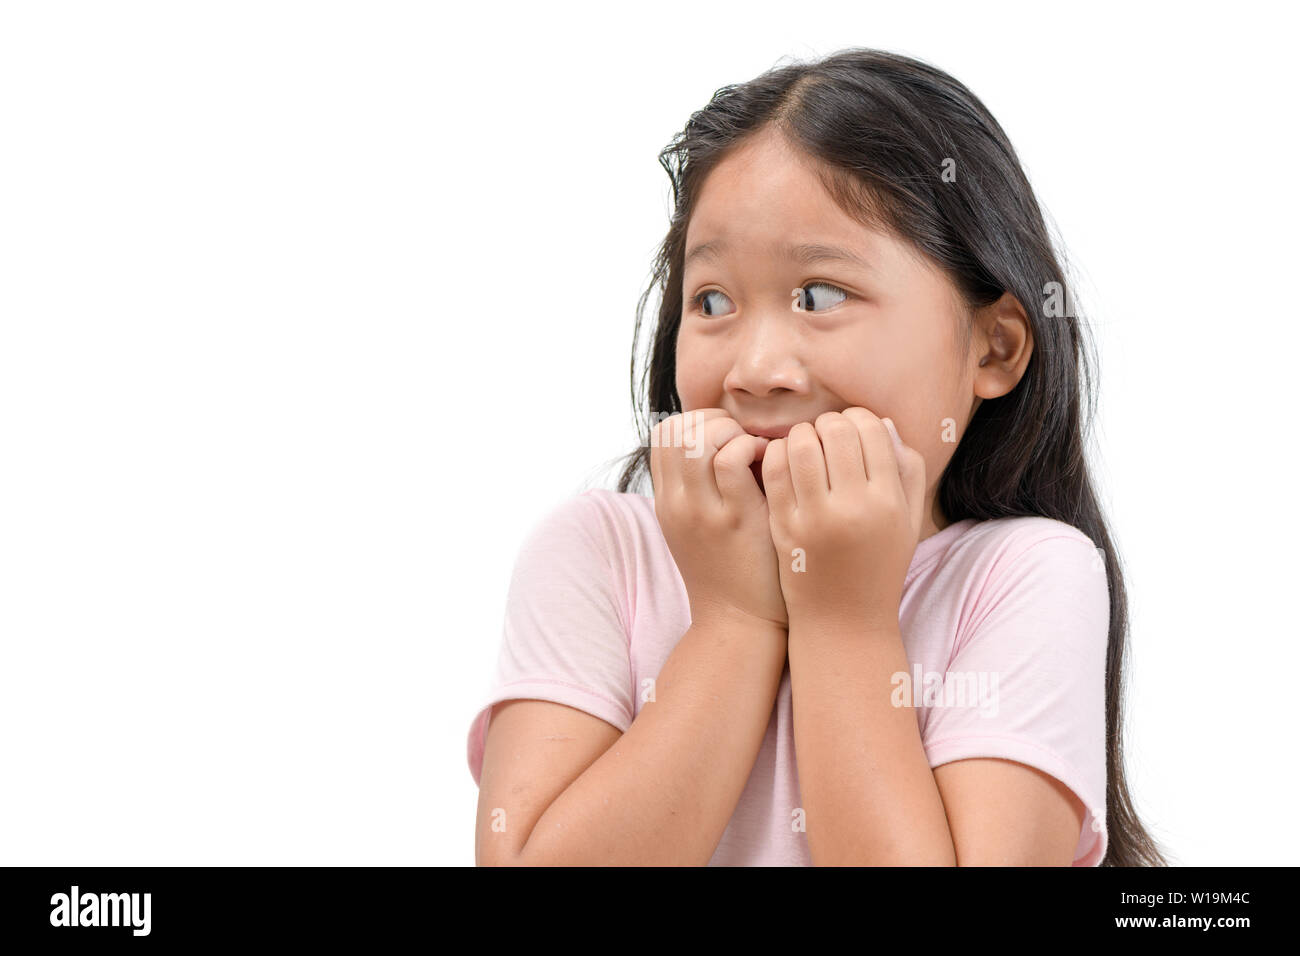 Scared Kid High Resolution Stock Photography and Images - Alamy